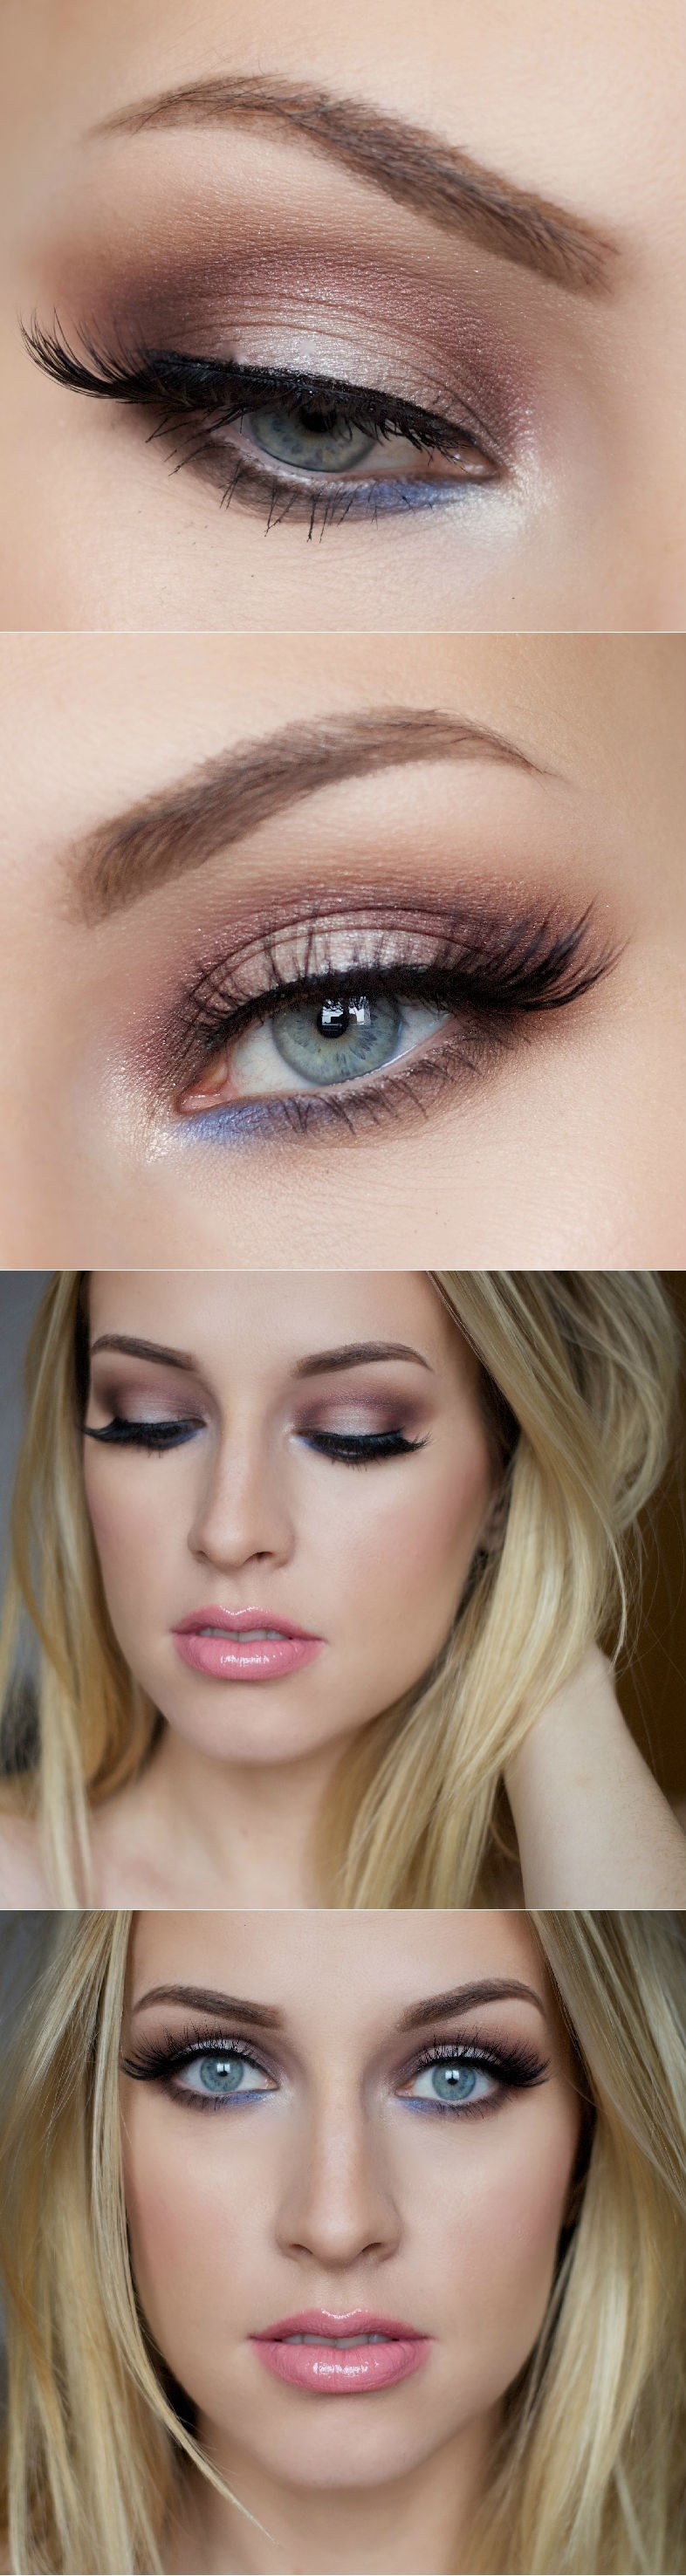 5 Ways To Make Blue Eyes Pop With Proper Eye Makeup - Her pertaining to How To Apply Eye Makeup For Big Blue Eyes